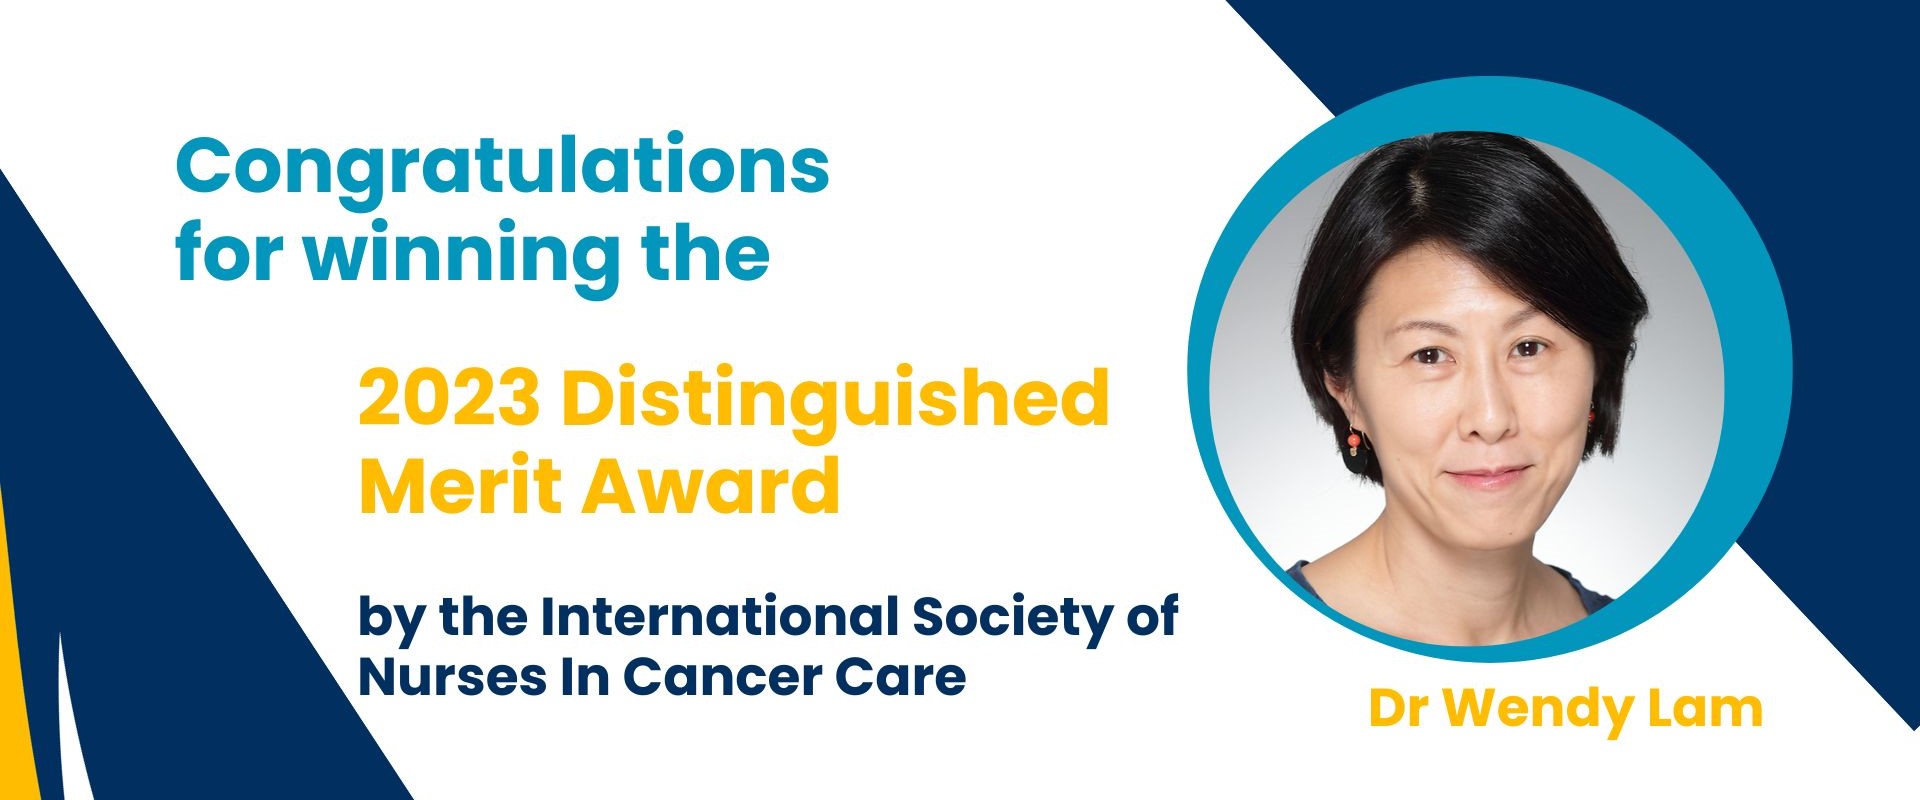 Dr Wendy Lam won the 2023 Distinguished Merit Award by the International Society of Nurses in Cancer Care